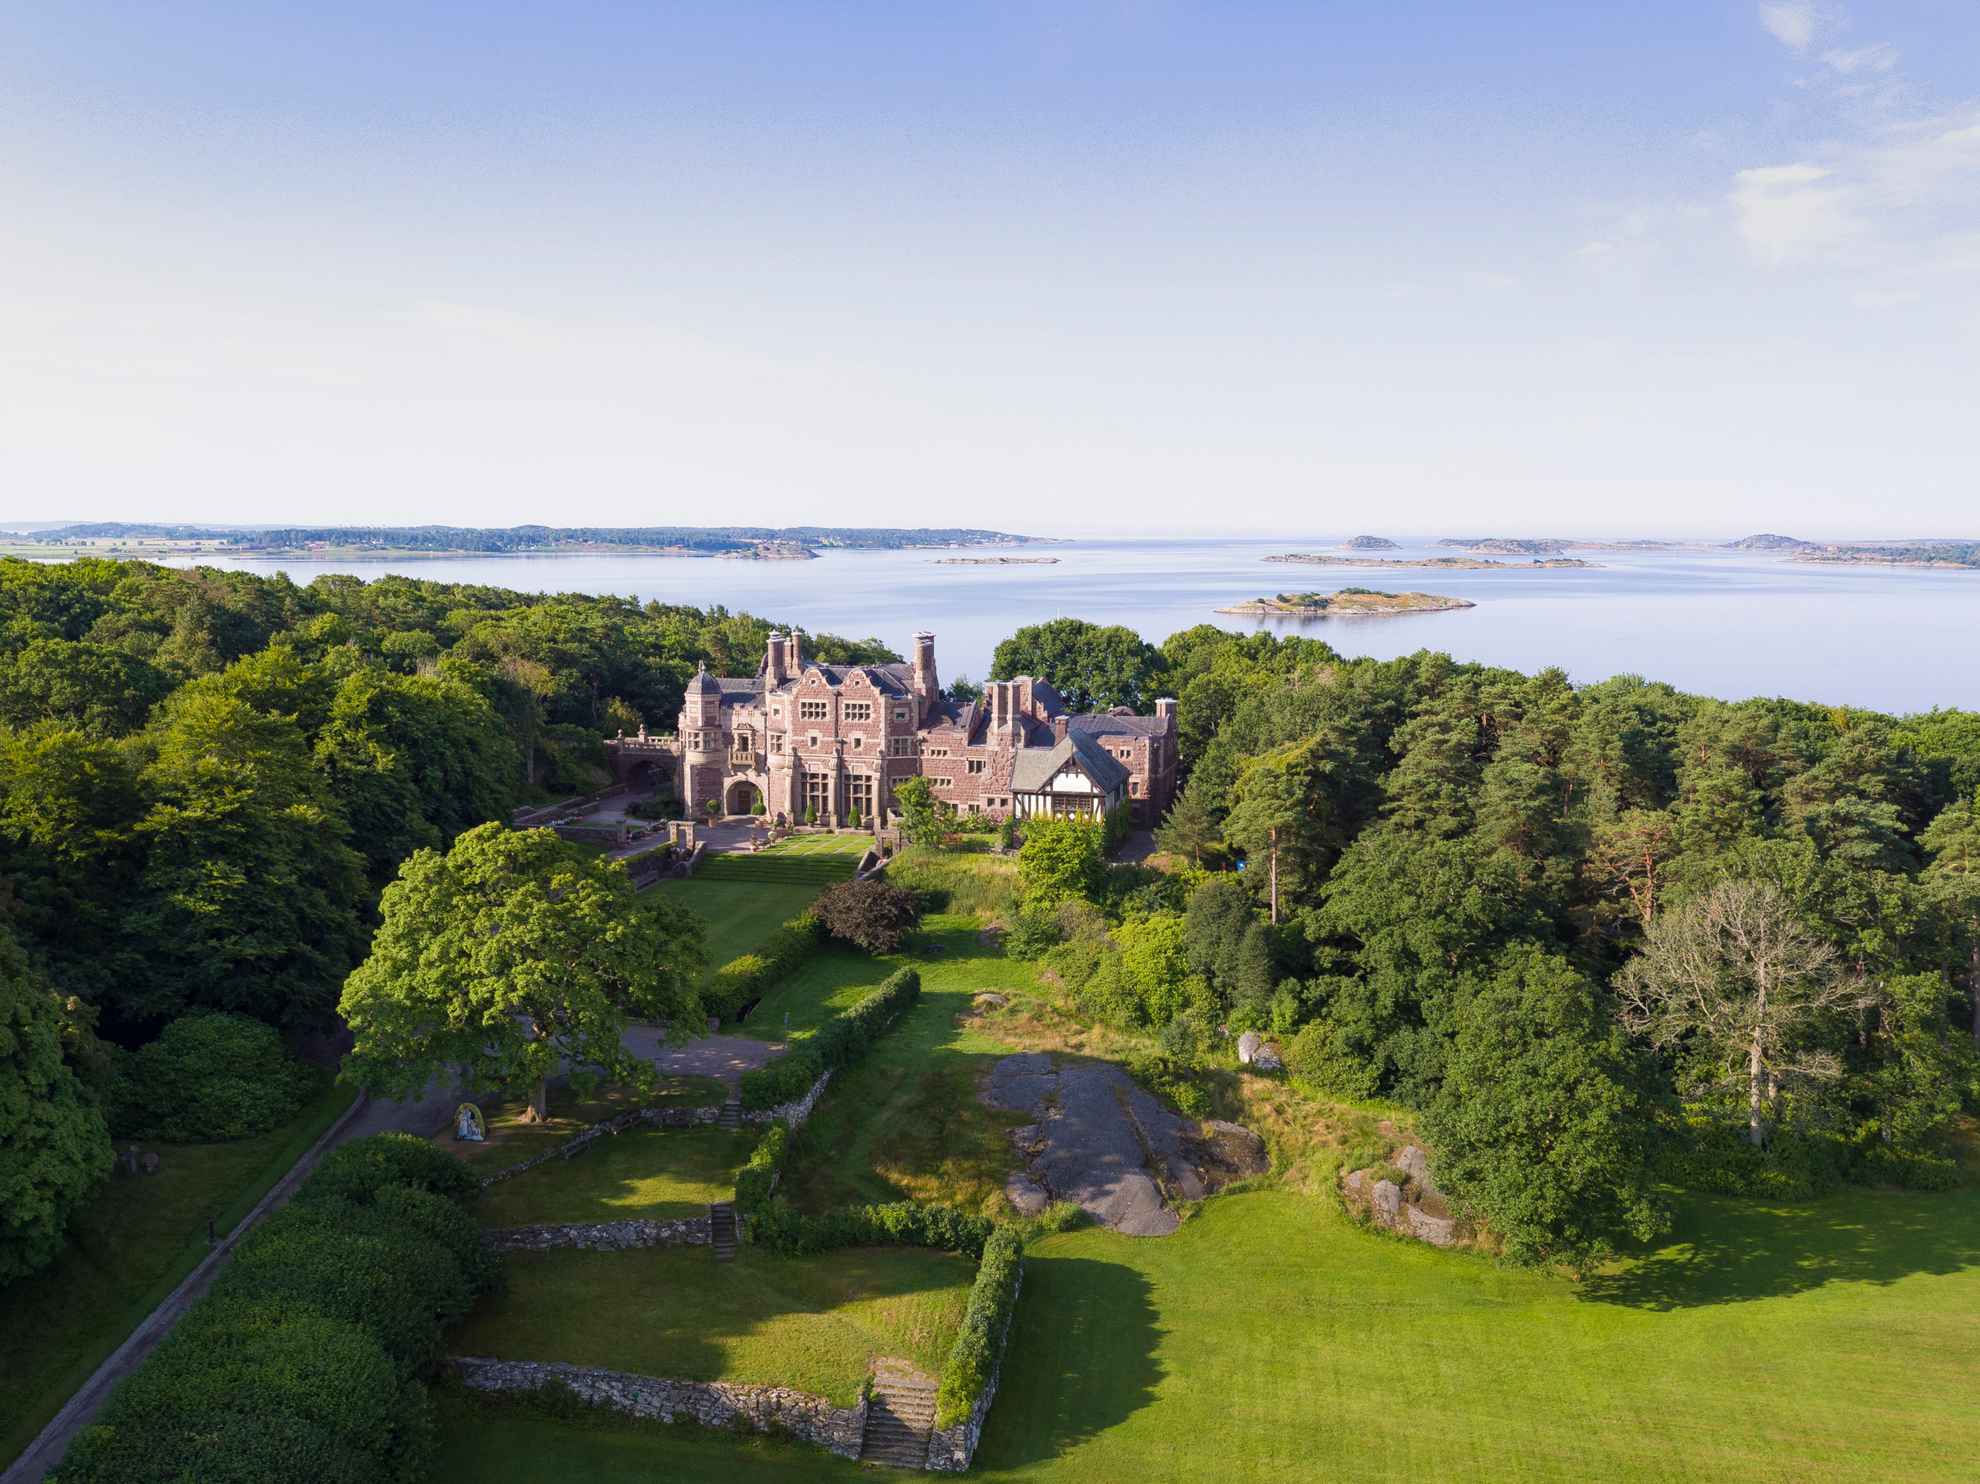 An aerial view of Tjolöholm Castle next to the water and surrounded by greenery during summer.